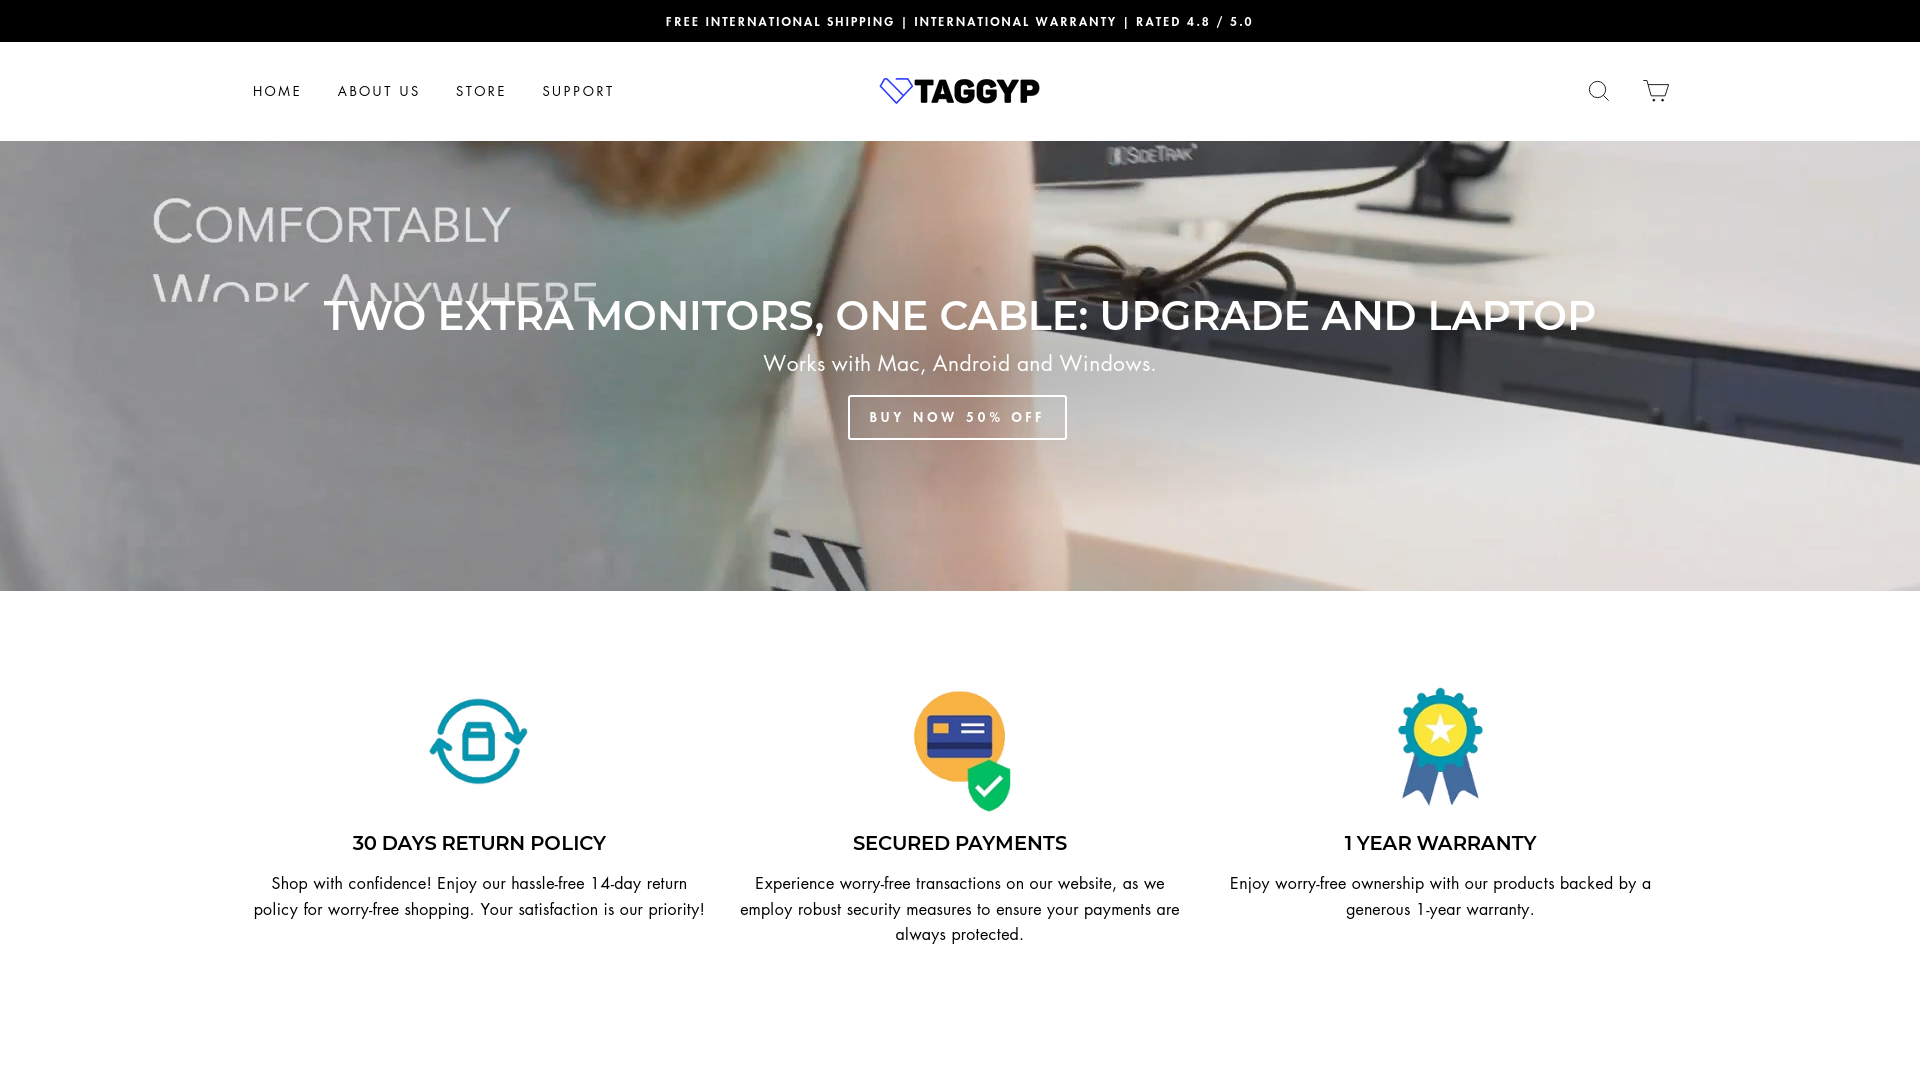 Taggyp scam store at taggyp.com